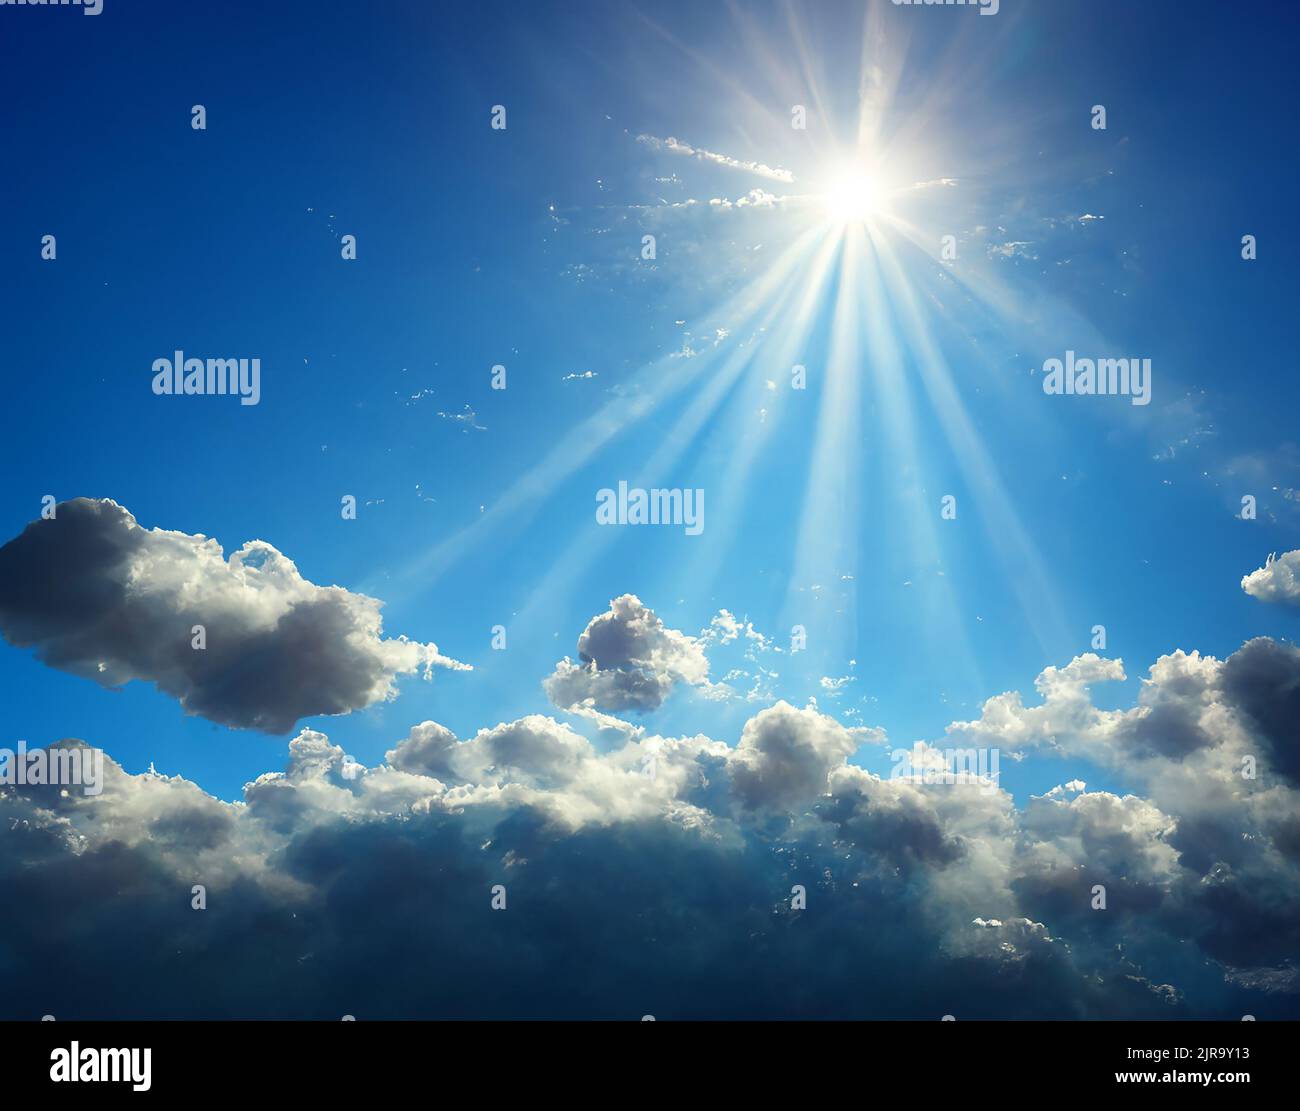 Blue sky with clouds and sun. Stock Photo